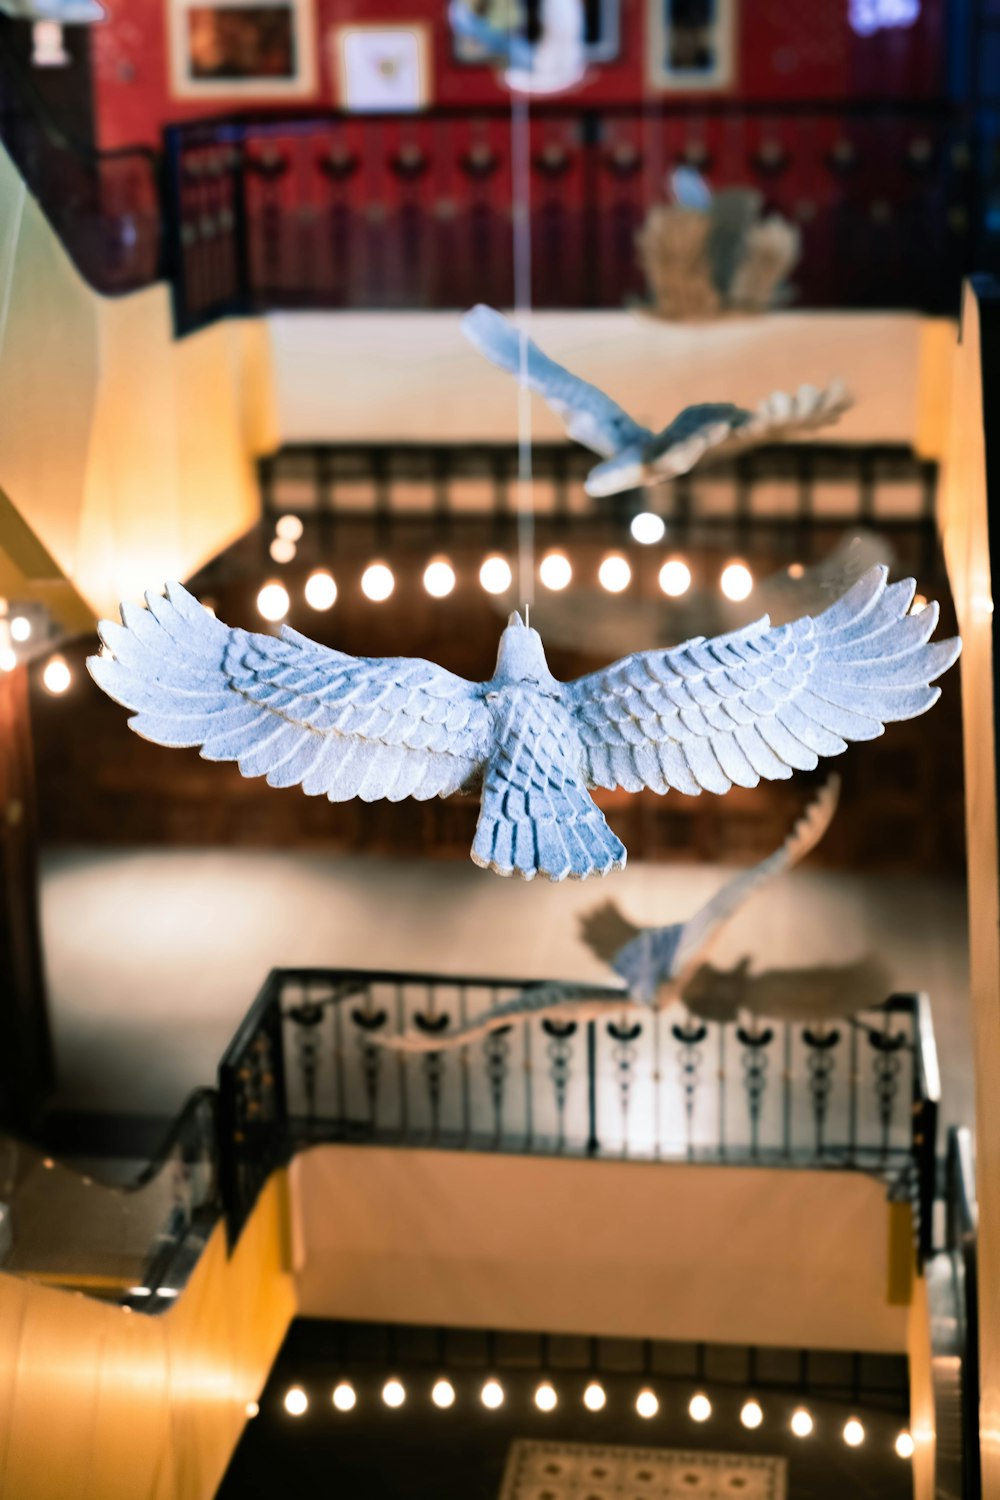 a white bird flying over a stairwell in a building